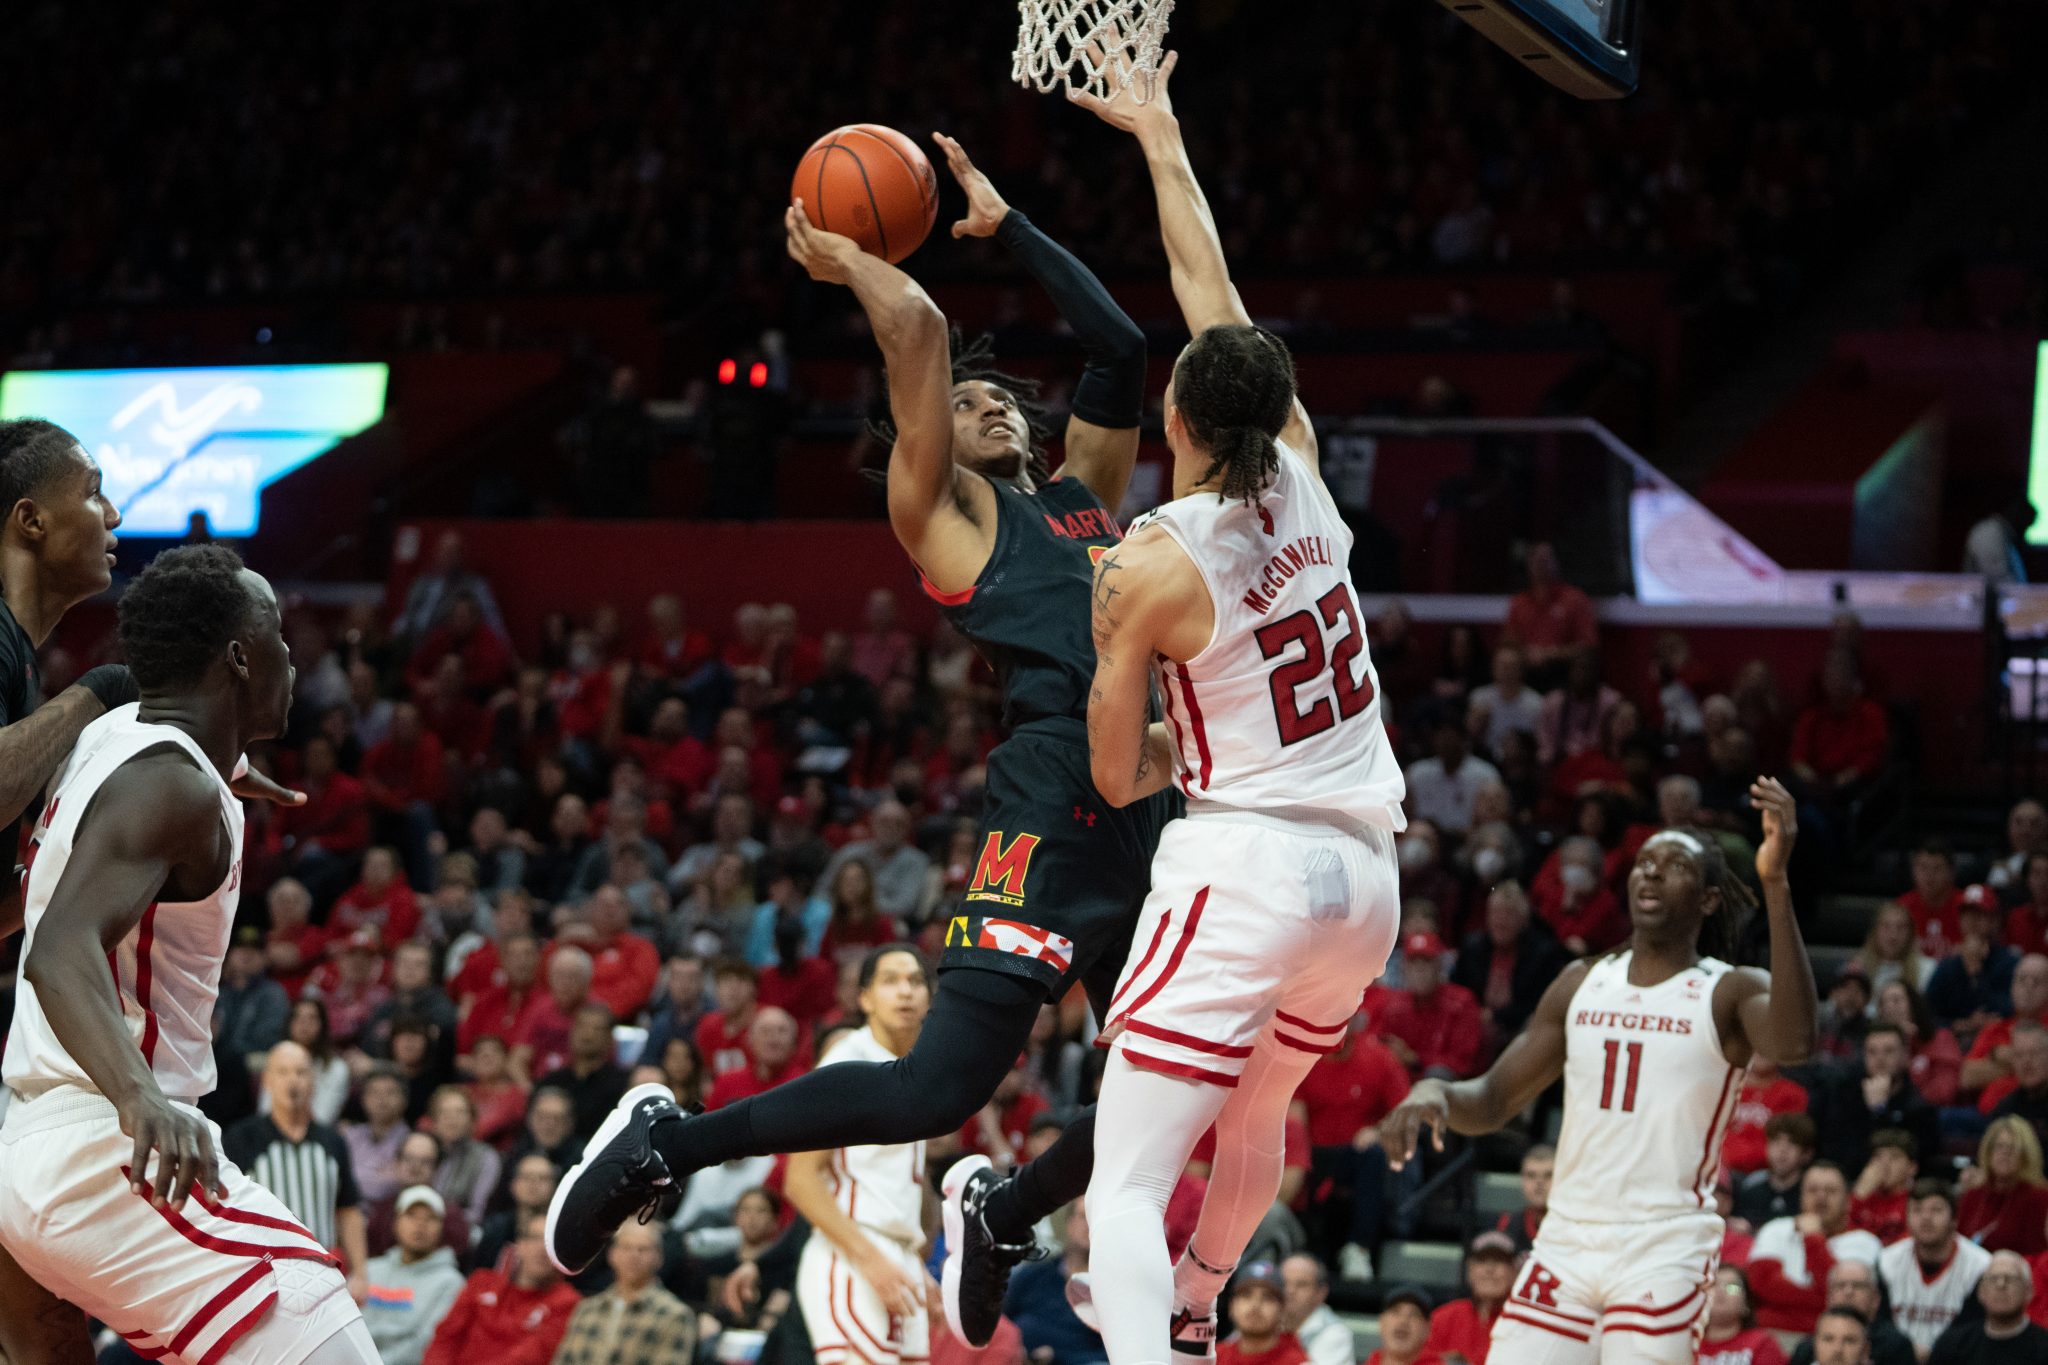 Maryland men's basketball reached new low in turnover-laden Rutgers loss